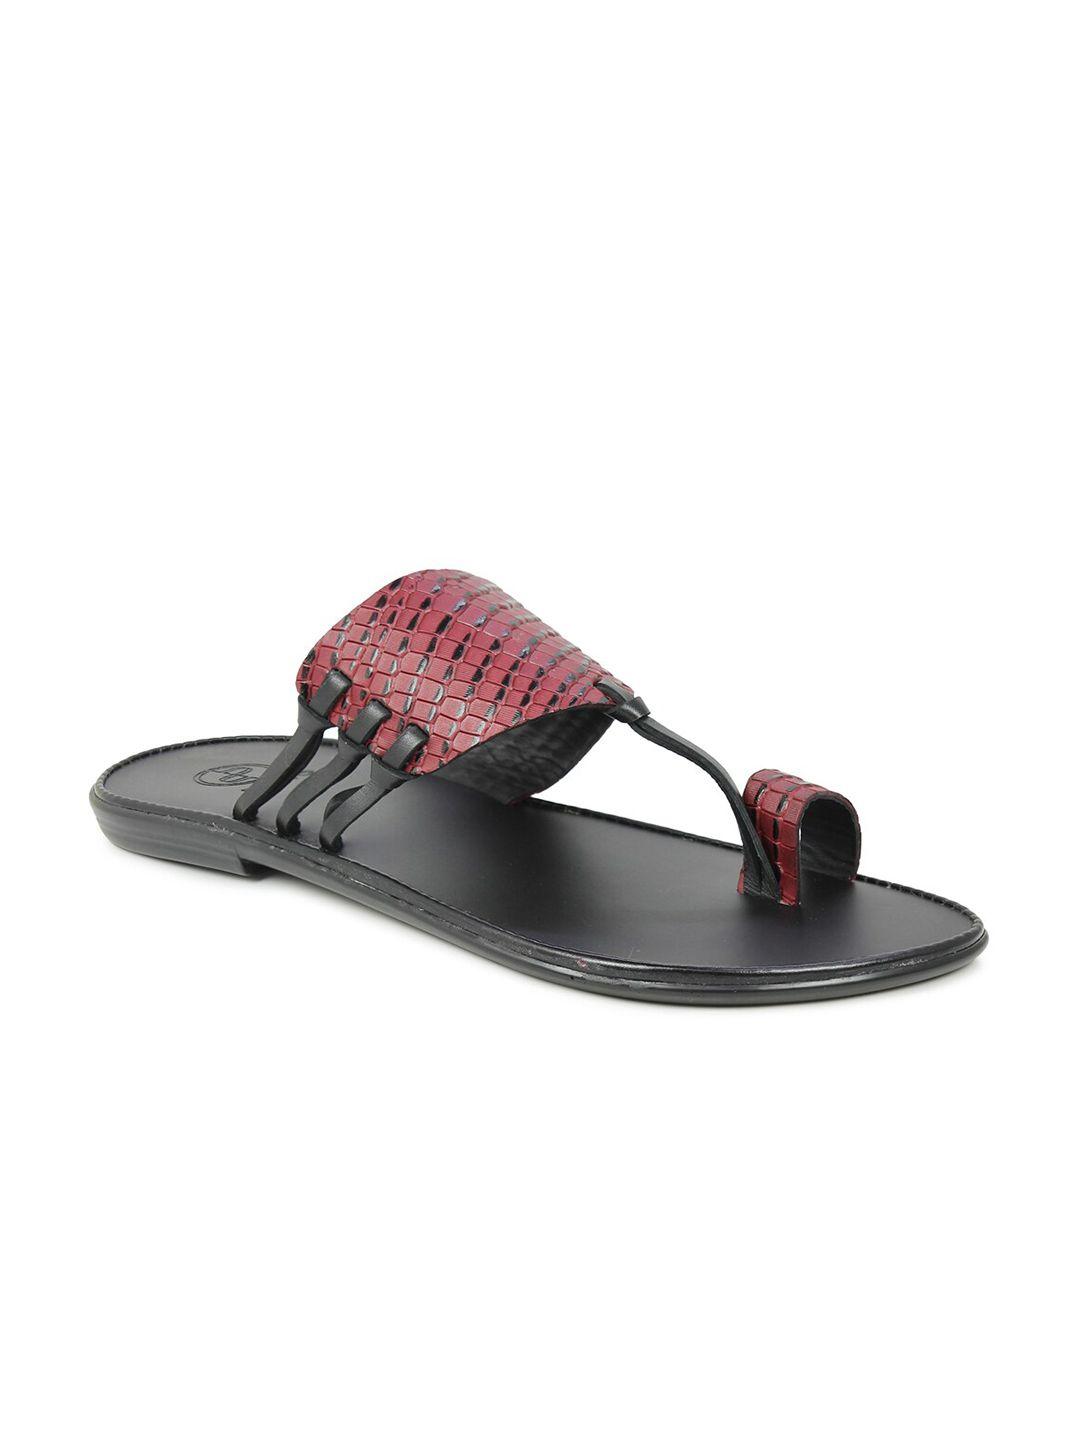 privo by inc.5 men red & black leather comfort sandals